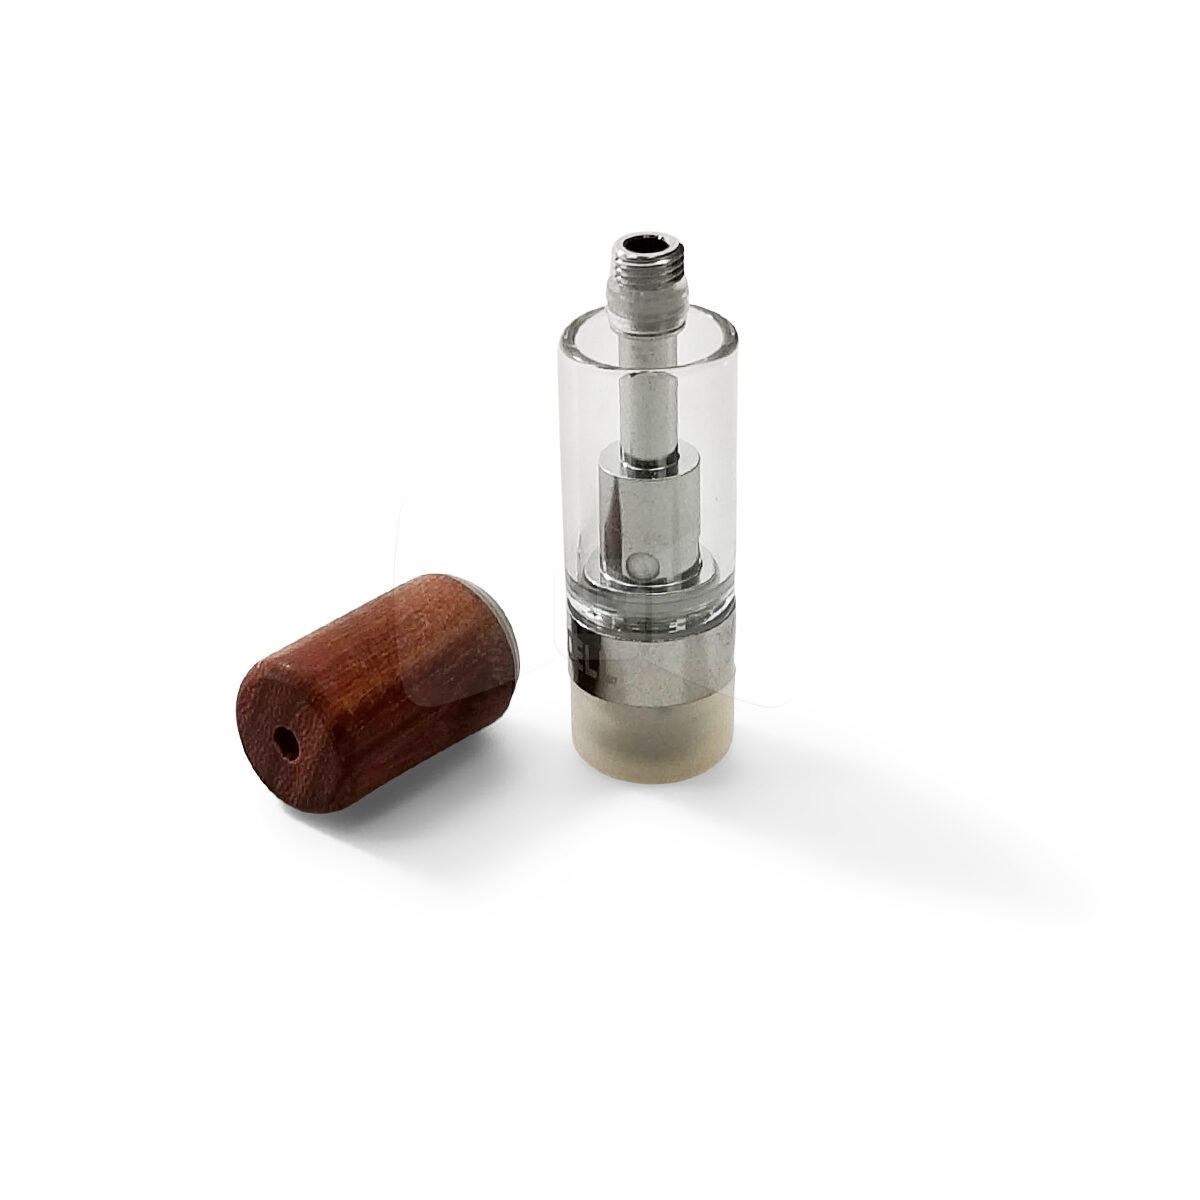 CCell Threaded Cartridge & Mouthpiece Silver .5ML Wood Barrel